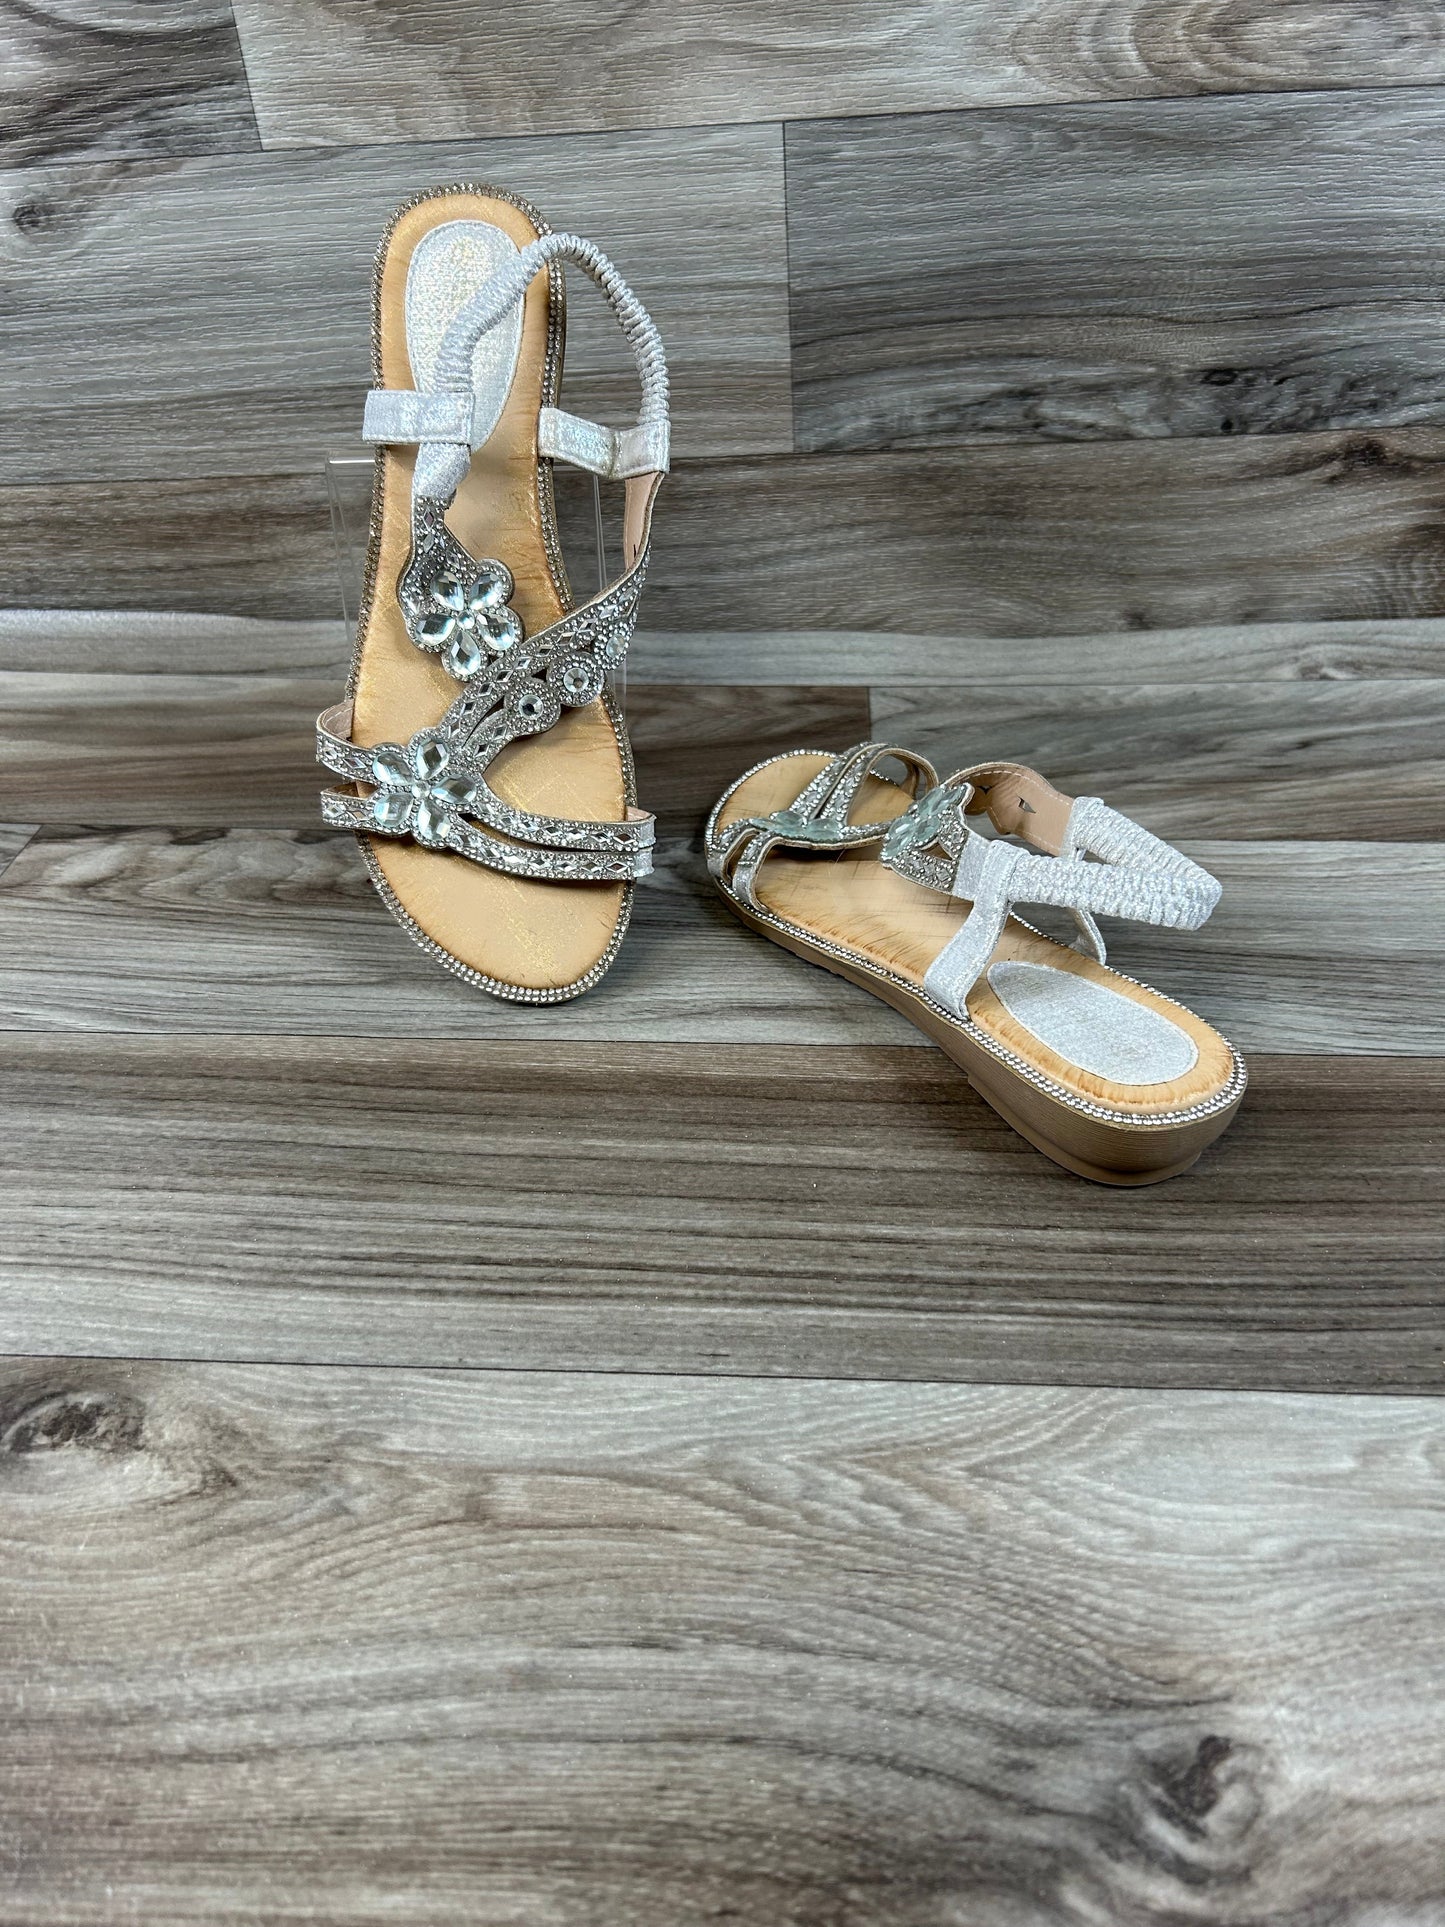 Silver & Tan Sandals Heels Wedge Clothes Mentor, Size 9